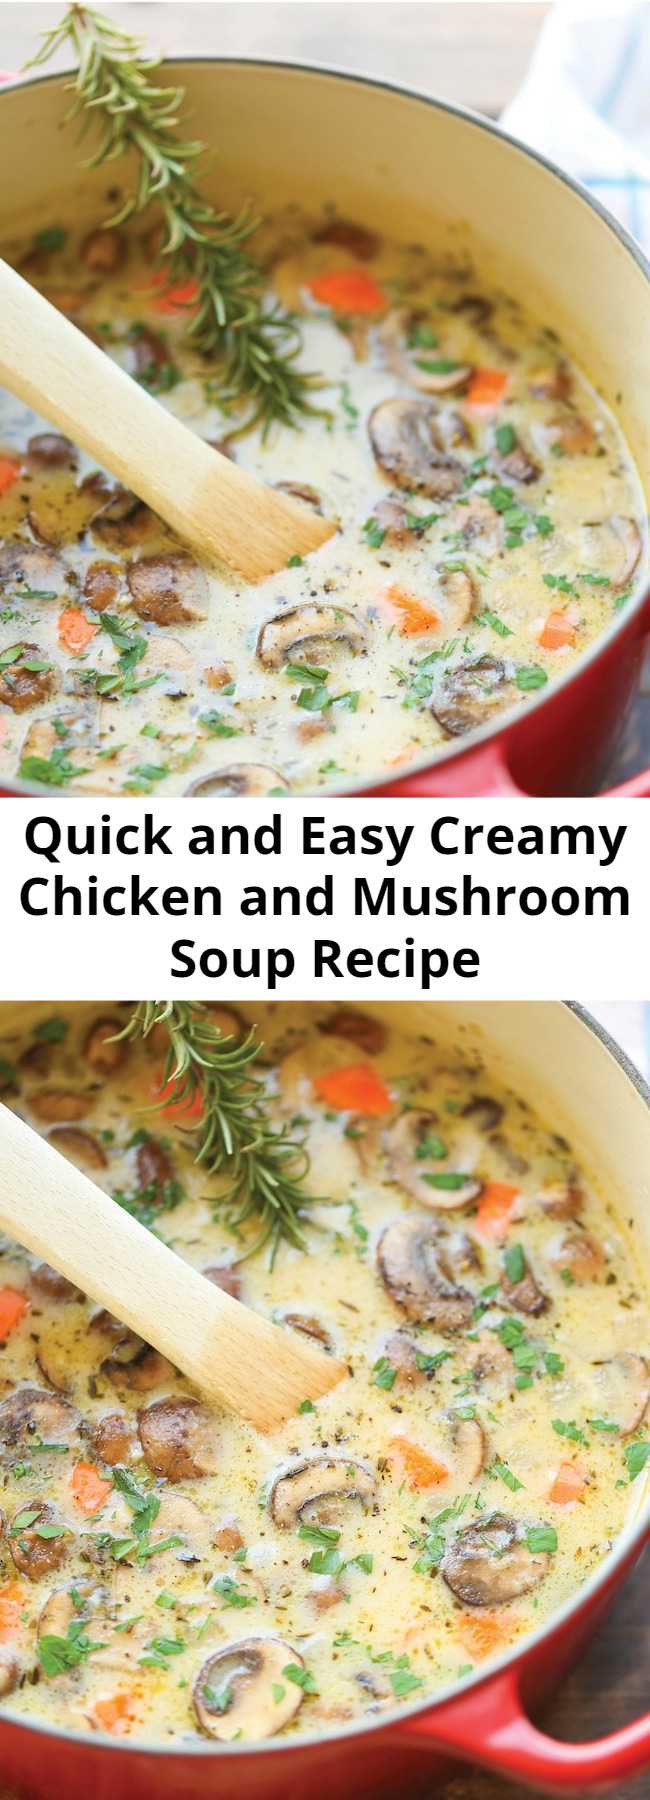 Quick and Easy Creamy Chicken and Mushroom Soup Recipe - So cozy, so comforting and just so creamy. Best of all, this is made in 30 min from start to finish – so quick and easy!